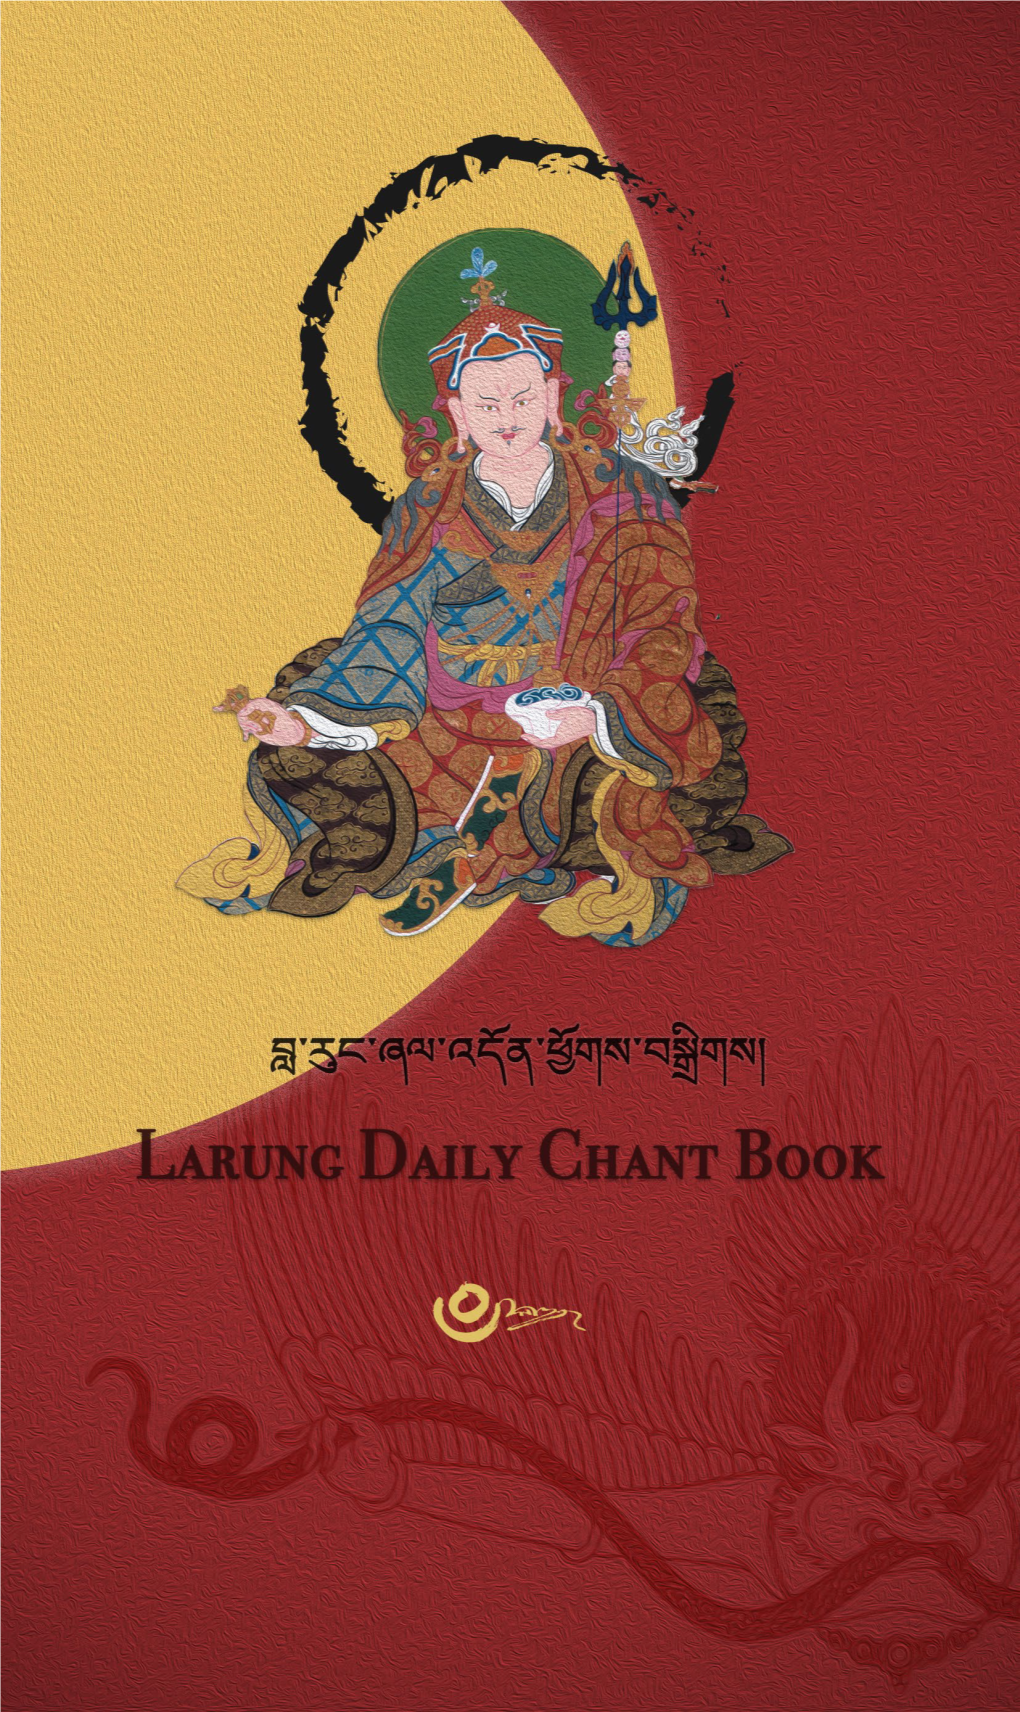 Supplication to the Victorious Longchenpa